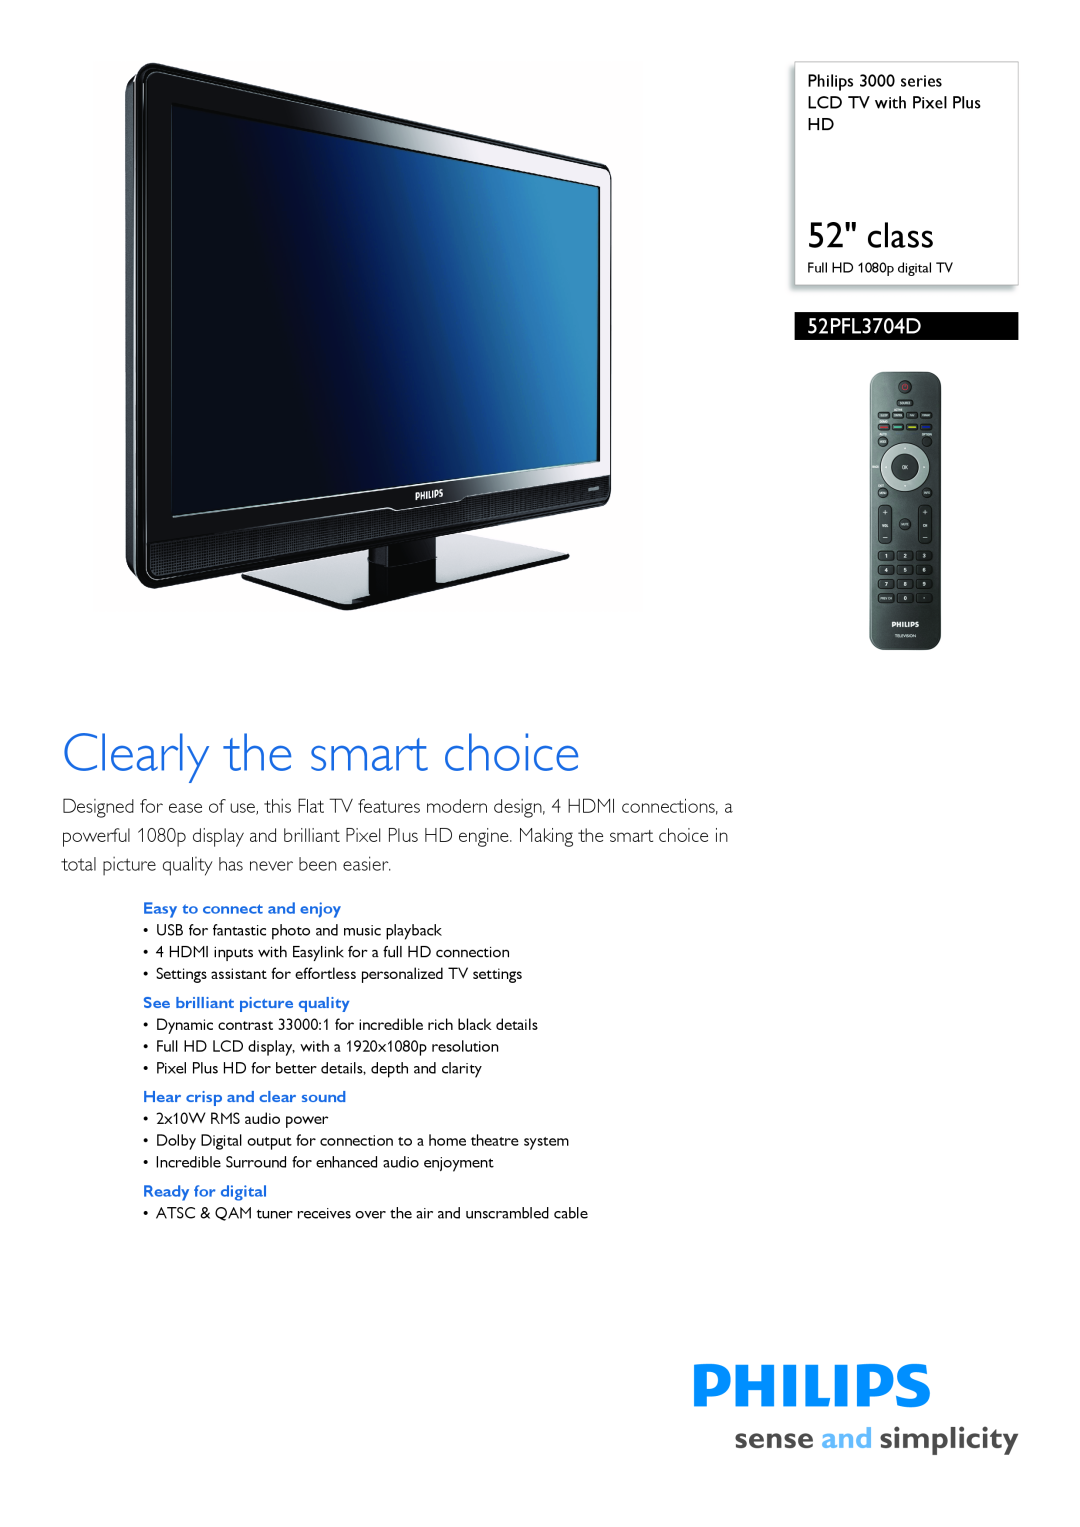 Philips 52PFL3704D/F7 manual Philips 3000 series LCD TV with Pixel Plus HD, Clearly the smart choice, class 